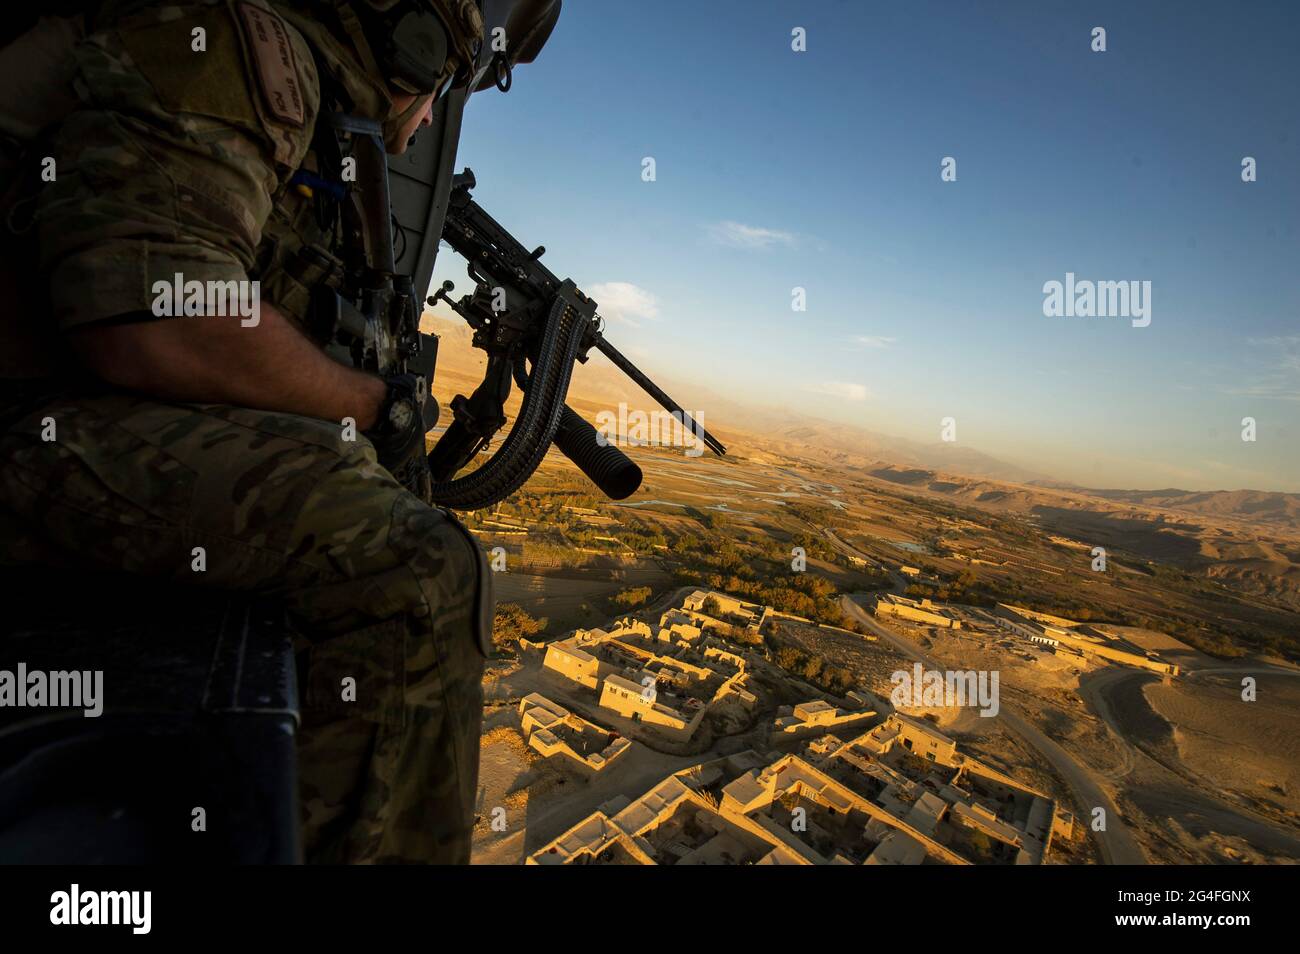 BAGRAM AIR BASE, AFGHANISTAN - 07 November 2012 -- A US Air Force pararescueman, 83rd Expeditionary Rescue Squadron during a mission near Bagram Air B Stock Photo